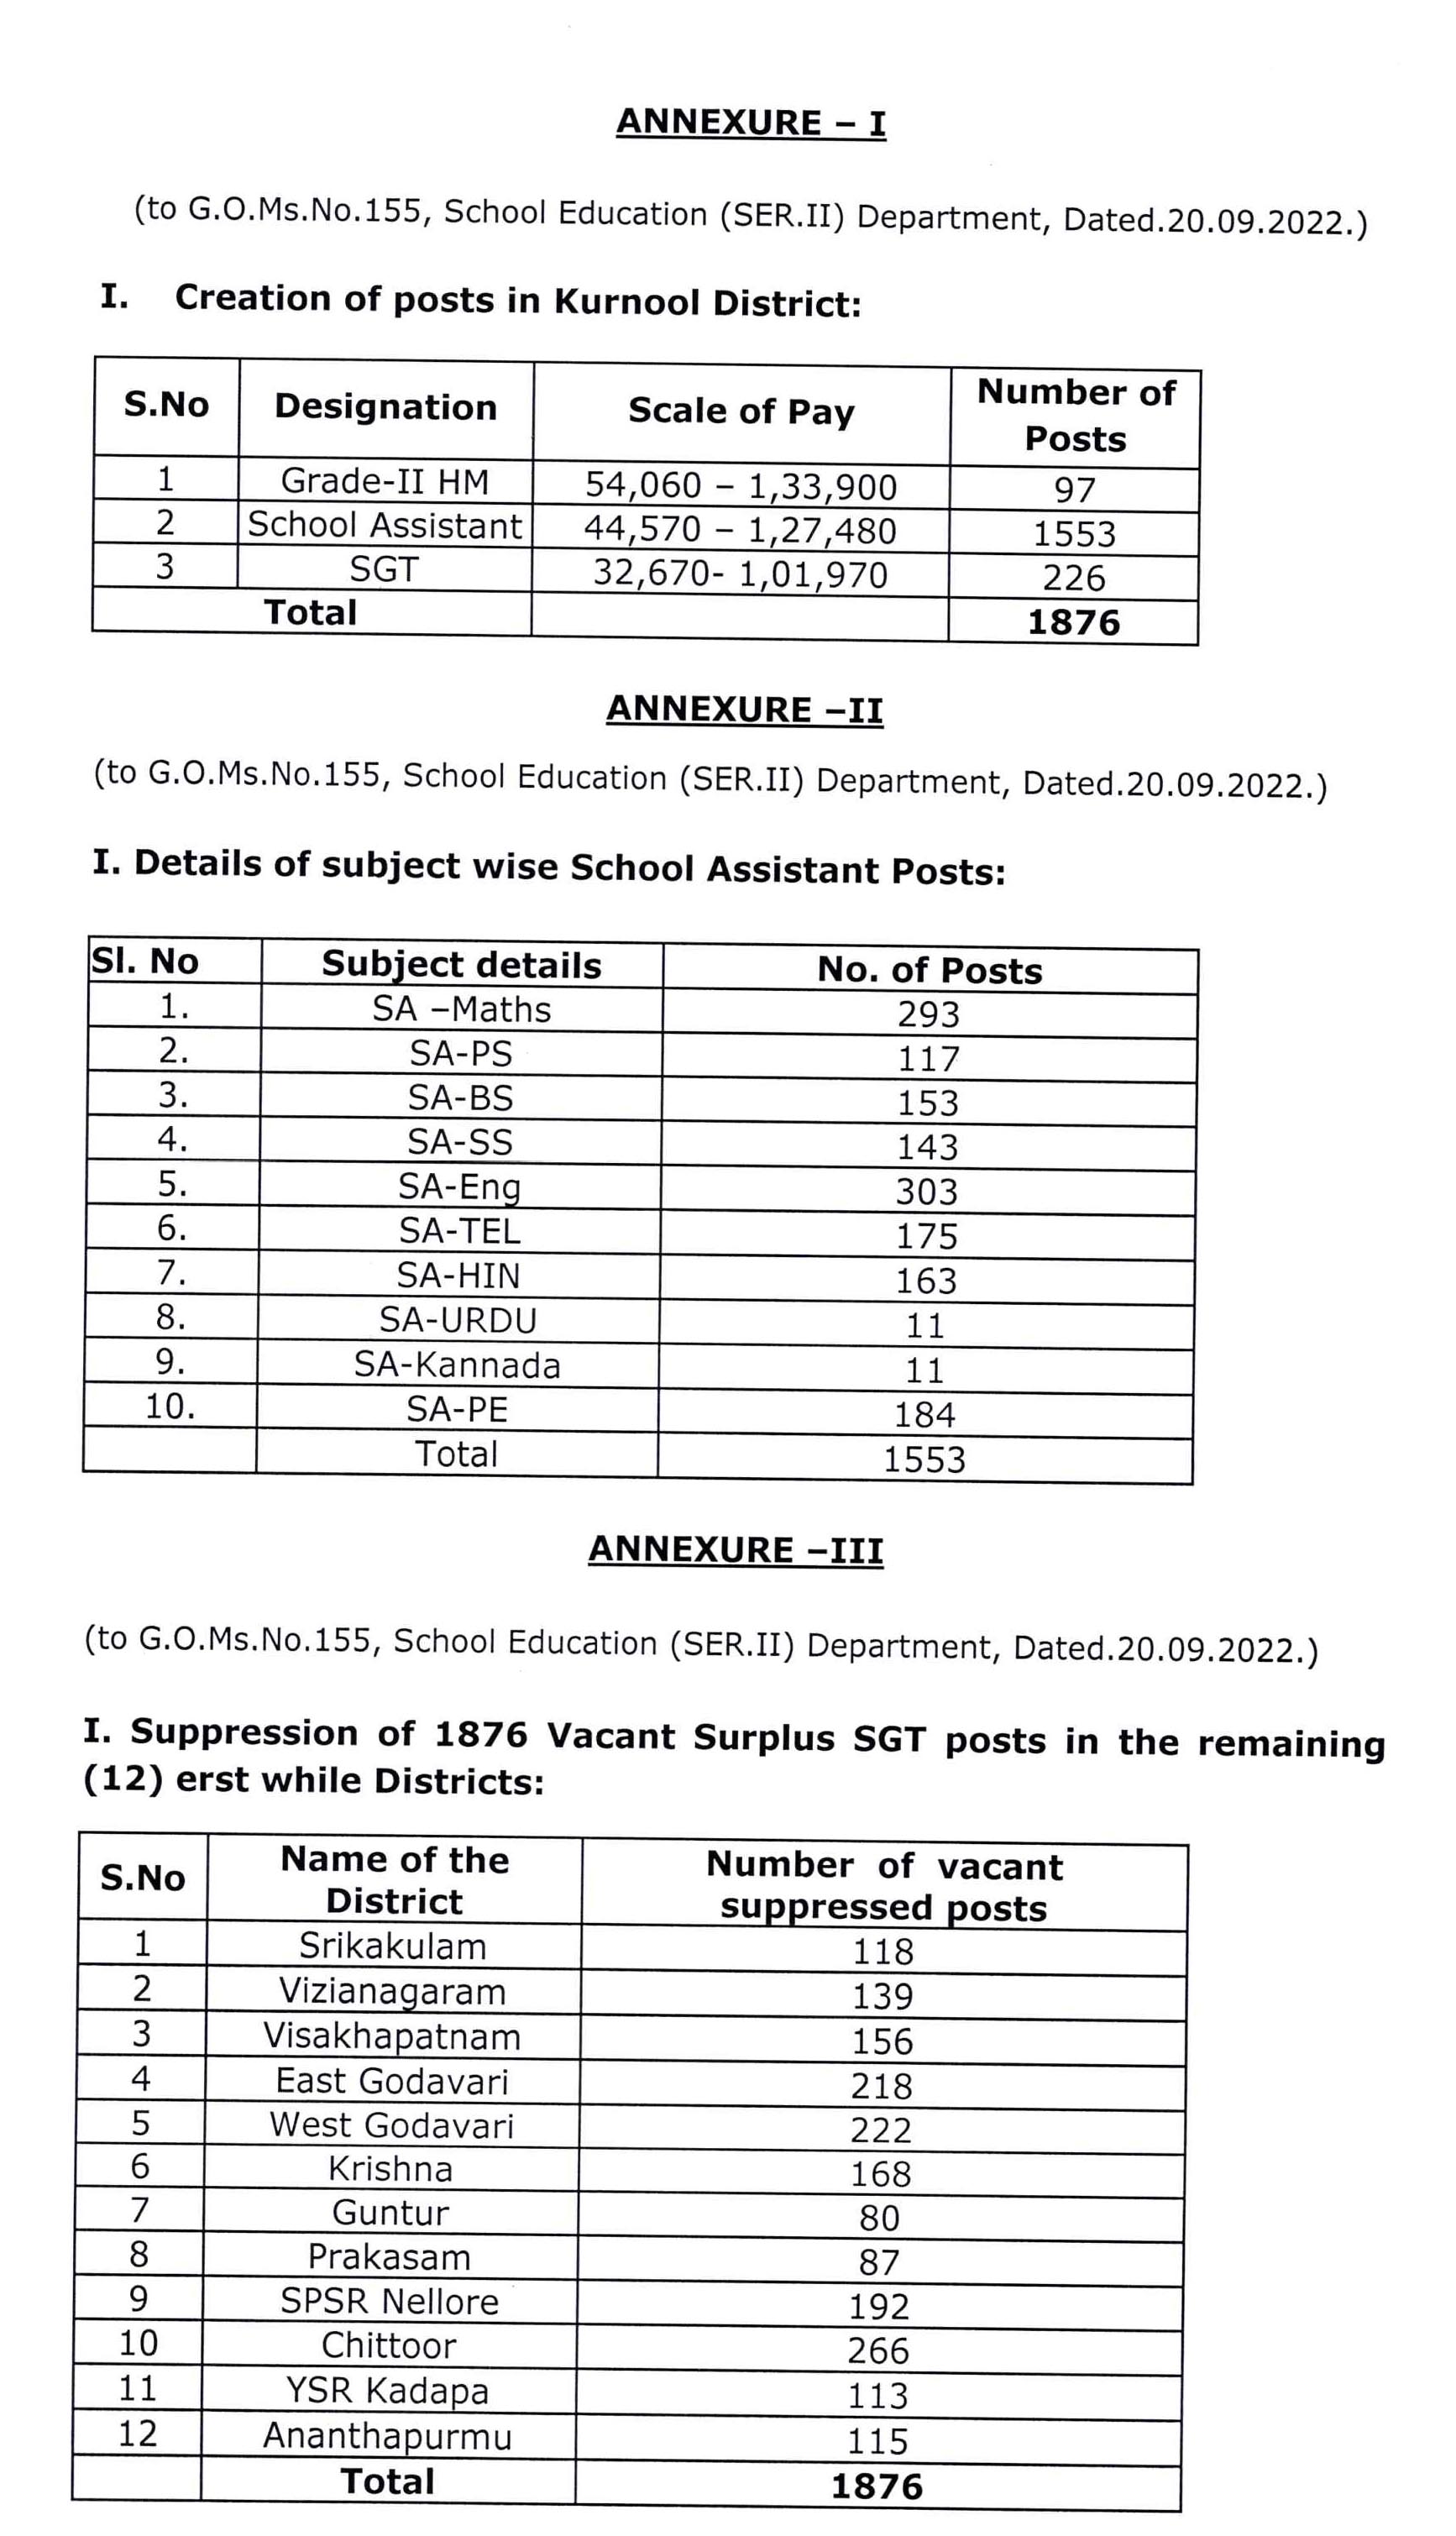 Creation of (i) 1876 posts of different categories in Kurnool District, duly suppressing equal number of vacant surplus SGT posts in the remaining 12 erst while Districts, and (ii) 46 SGT posts in Prakasam District